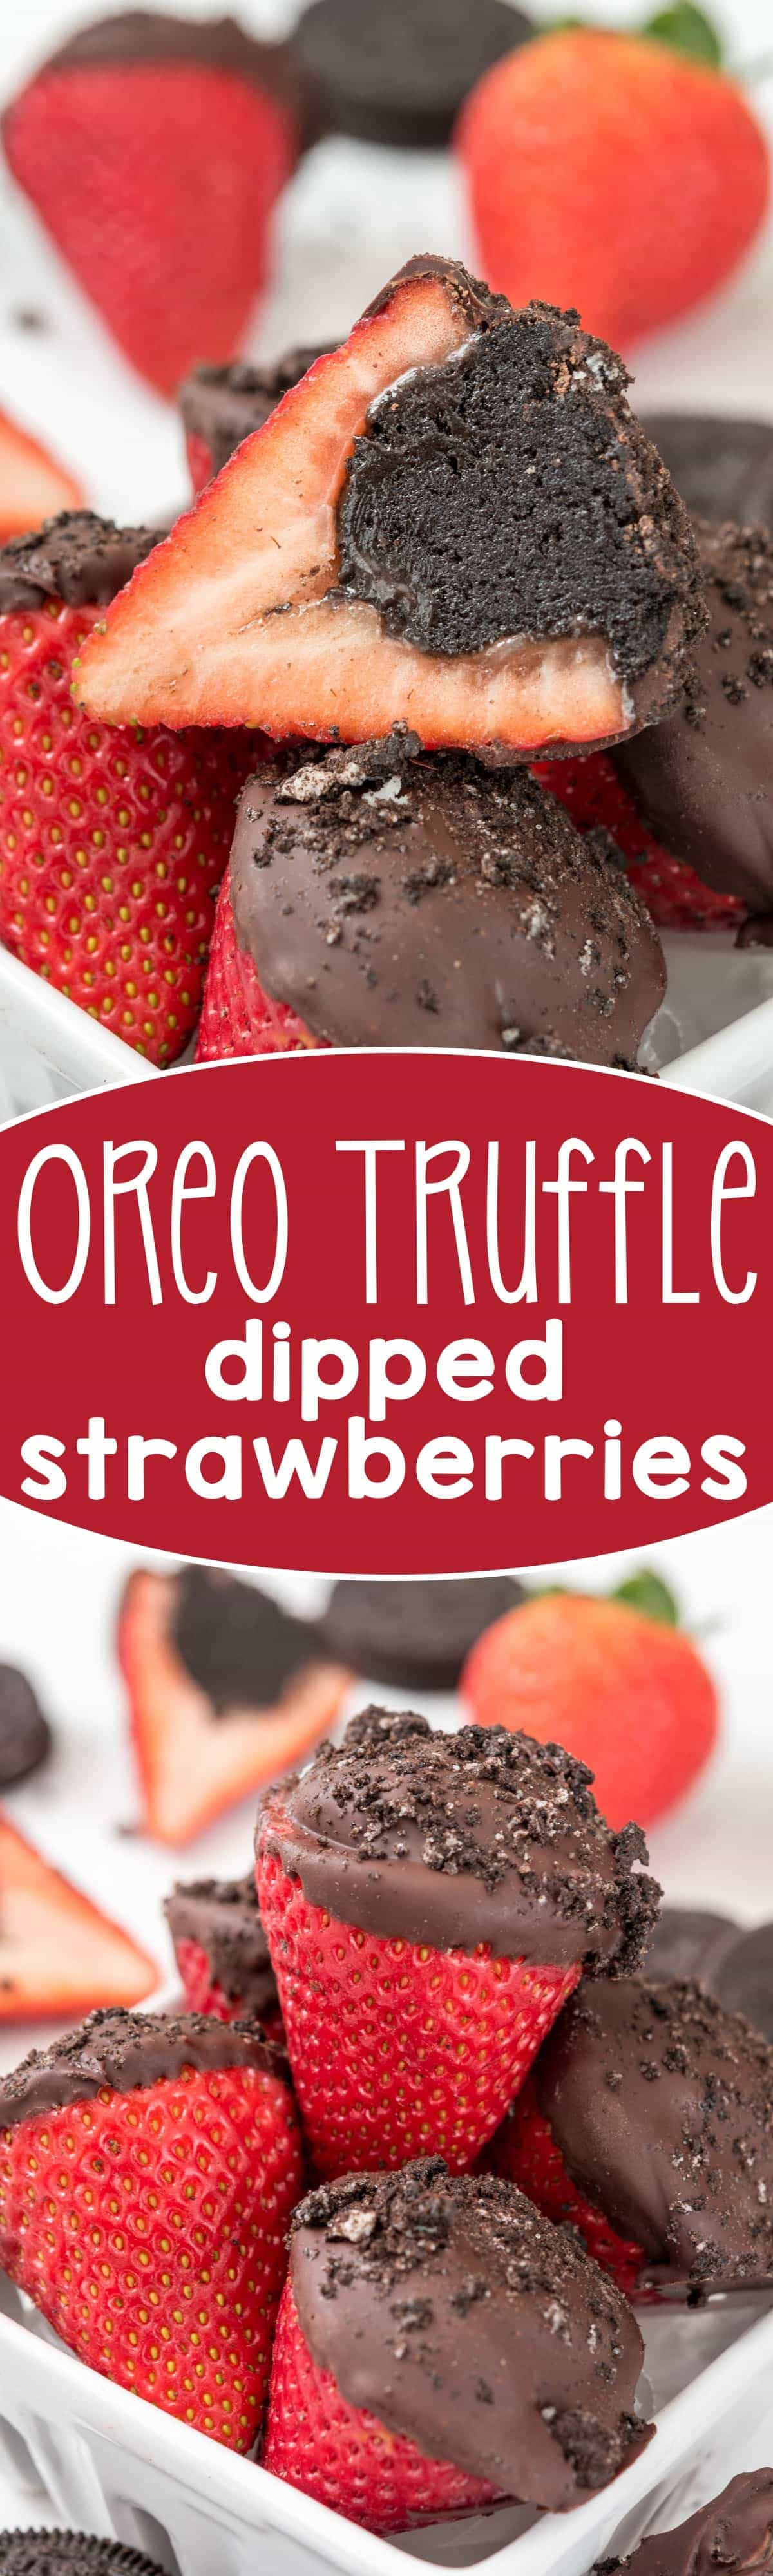 Oreo Truffle Dipped Strawberries - an easy treat for the one you love! Stuff strawberries with an Oreo truffle before you dip - genius!